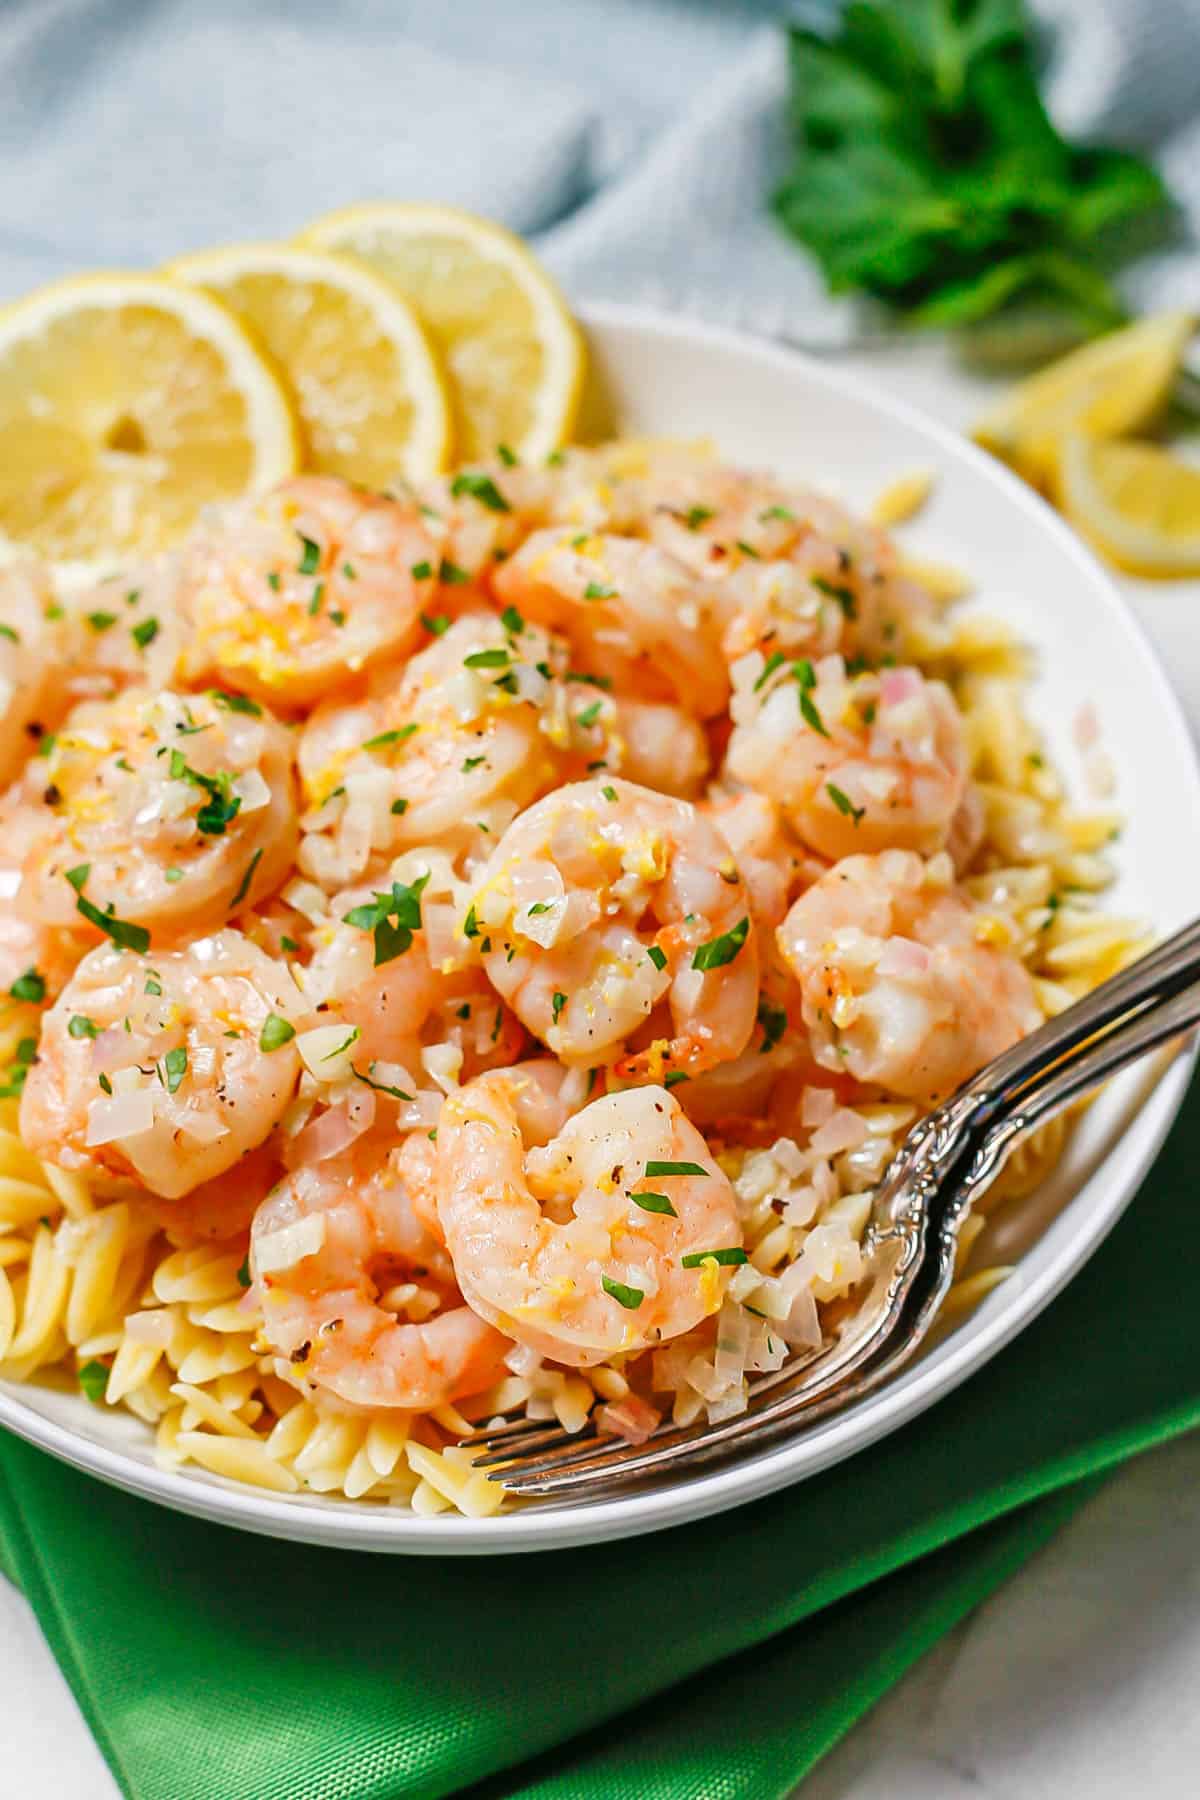 Forks resting in a bowl of lemon garlic shrimp and orzo pasta.